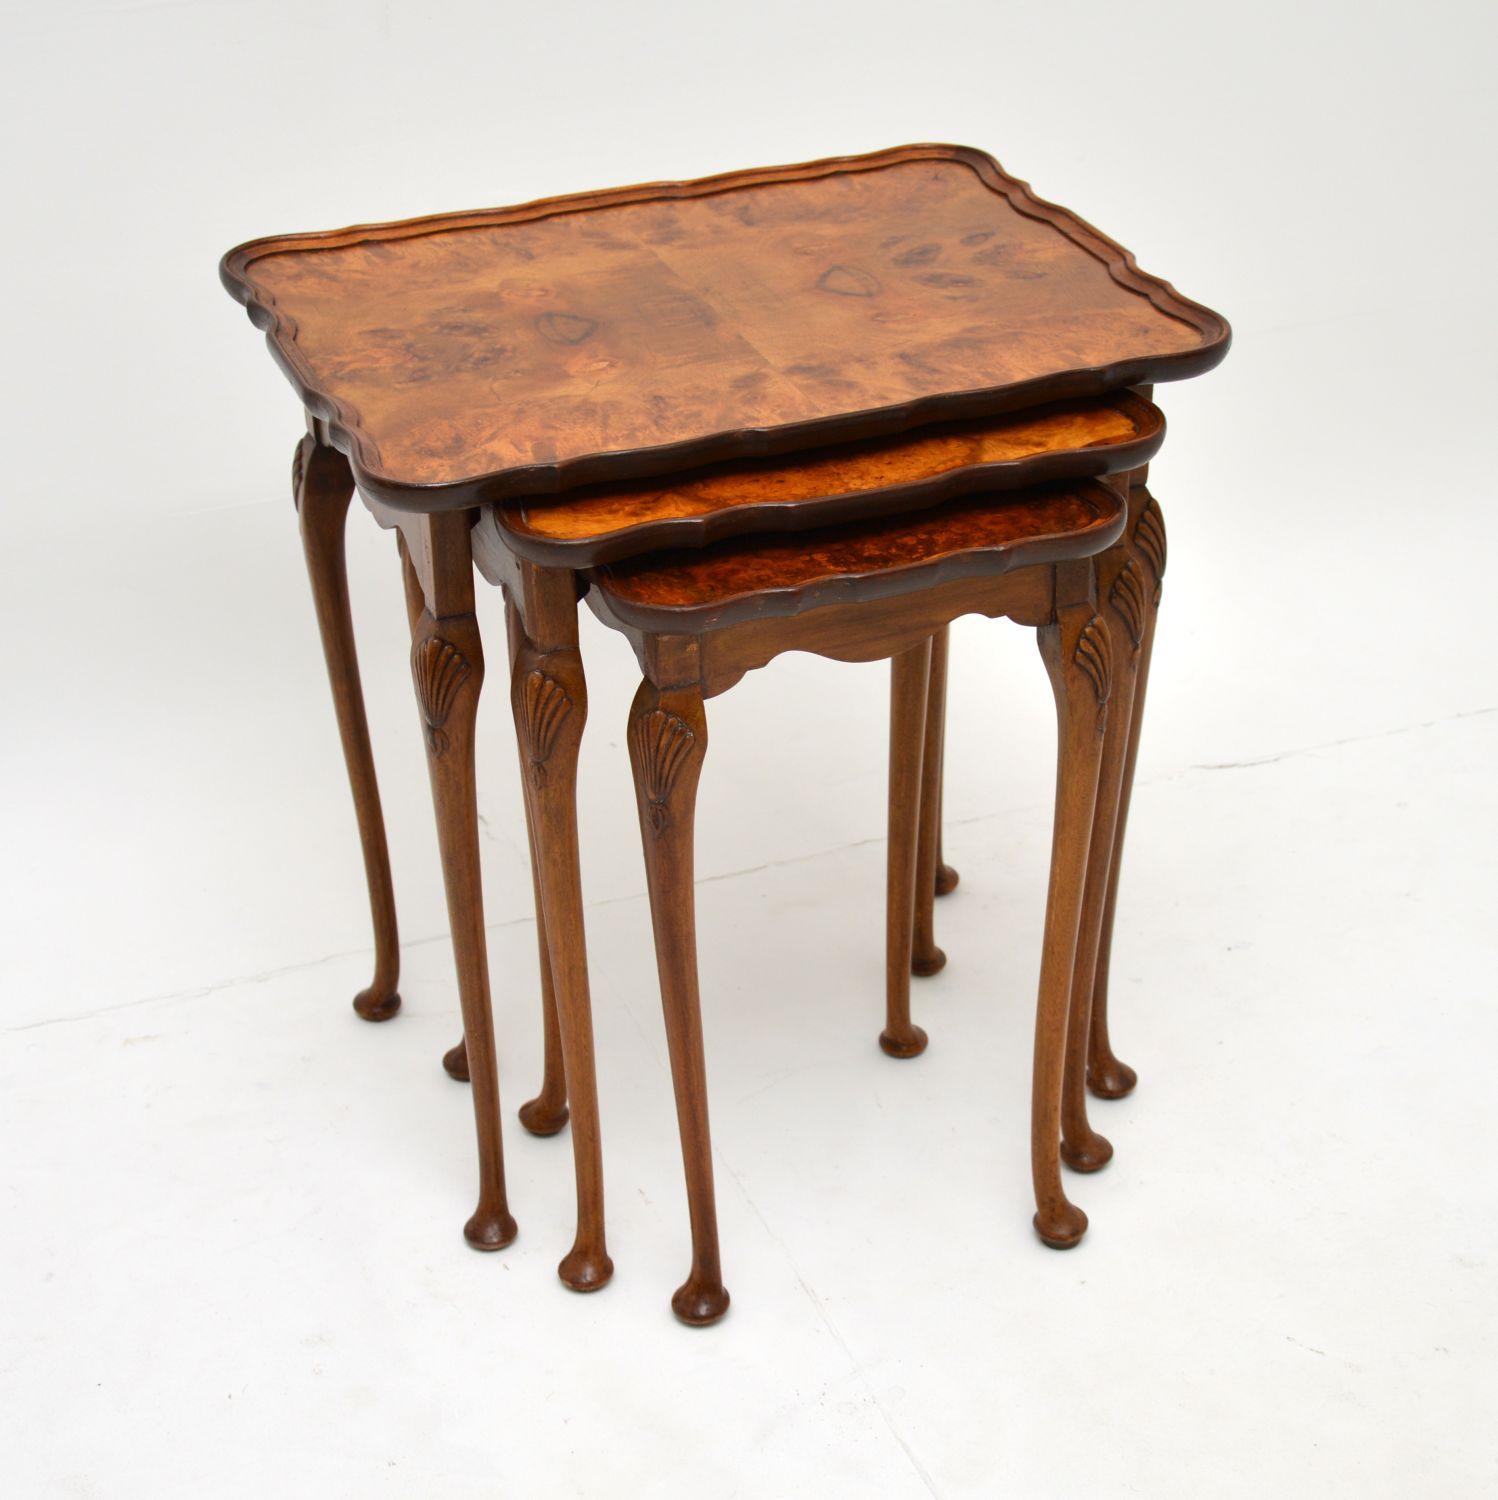 A wonderful original antique set of three nesting tables with burr walnut tops. These were made in England & date from around the 1930’s period.

They are beautifully made, with gorgeous shaped pie crust tops edges. There are shell carvings on the